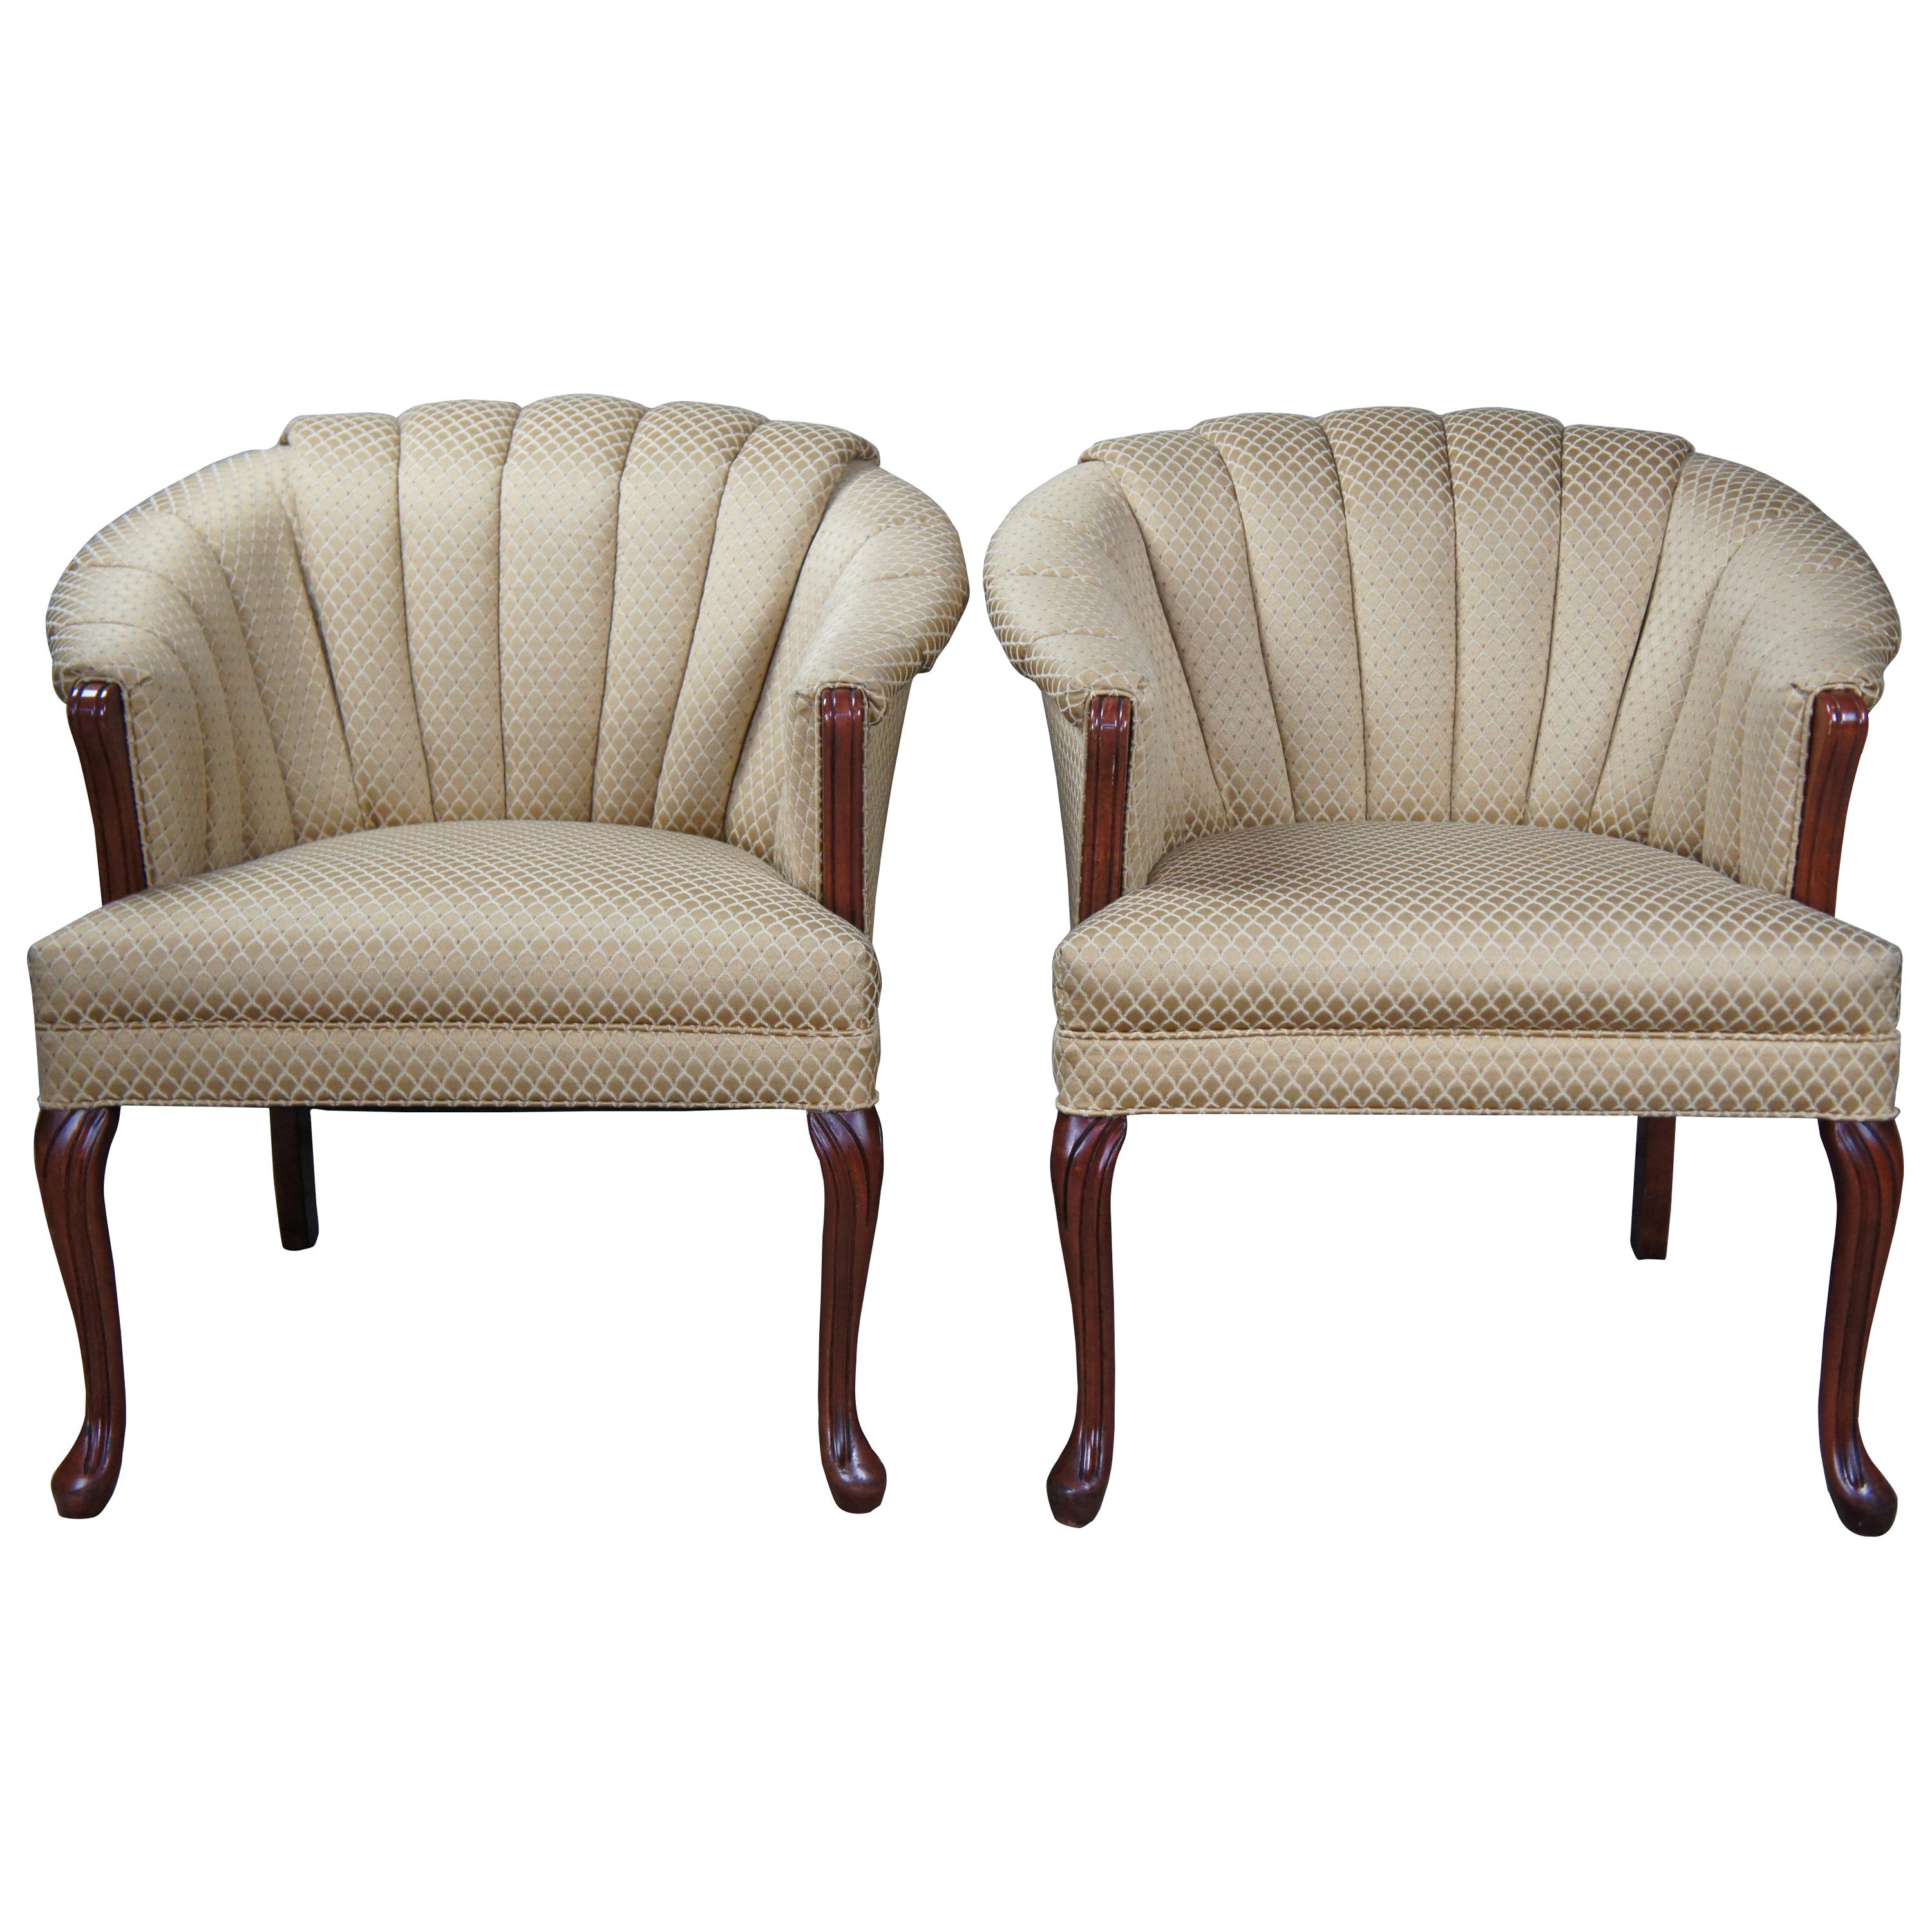 2 Art Deco Style Channel Back Club Arm Accent Queen Anne Barrel Chairs